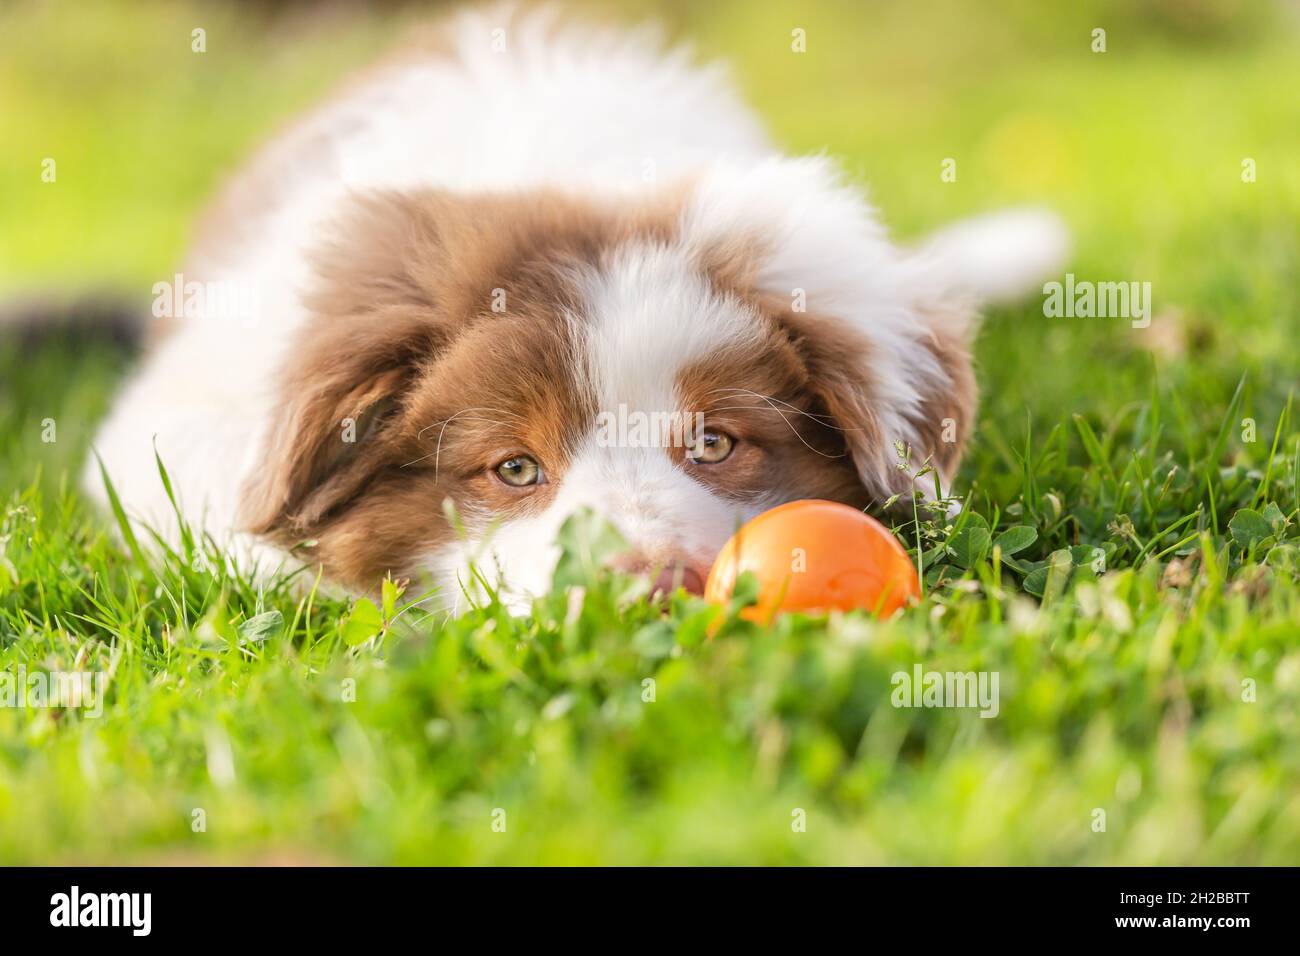 Close-up of a cute australian shepherd puppy dog playing with a ball in a garden outdoors Stock Photo